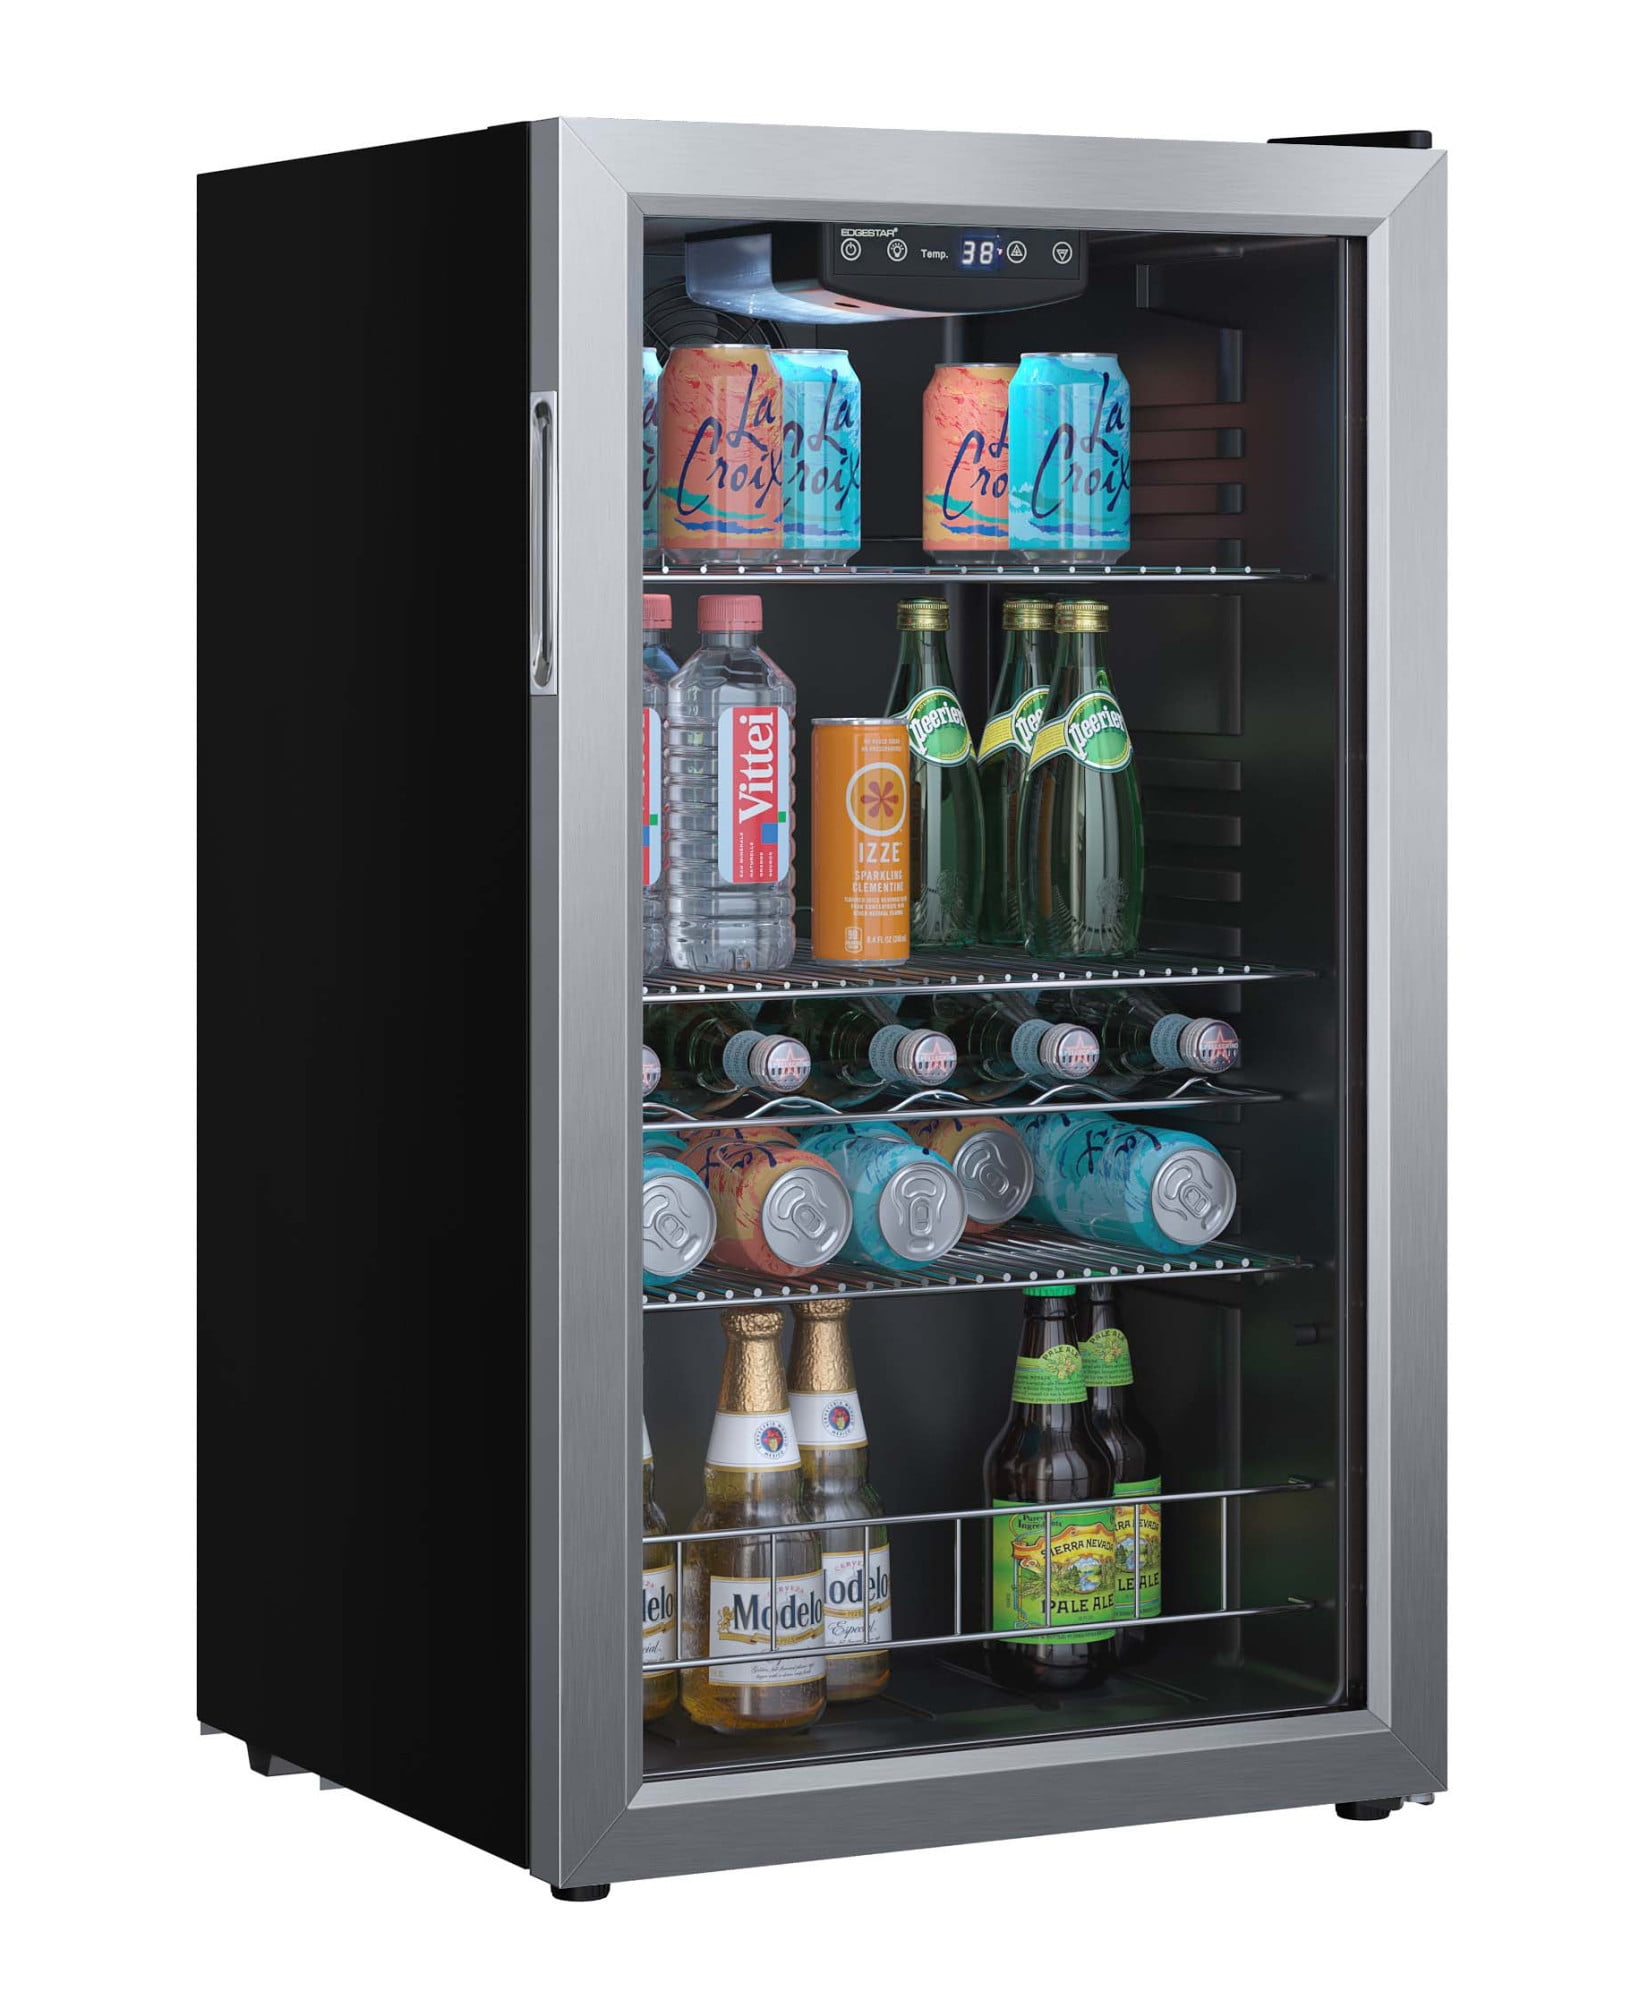 EdgeStar Bwc121 19" Wide 105 Can Capacity Extreme Cool Beverage Center - Stainless Steel